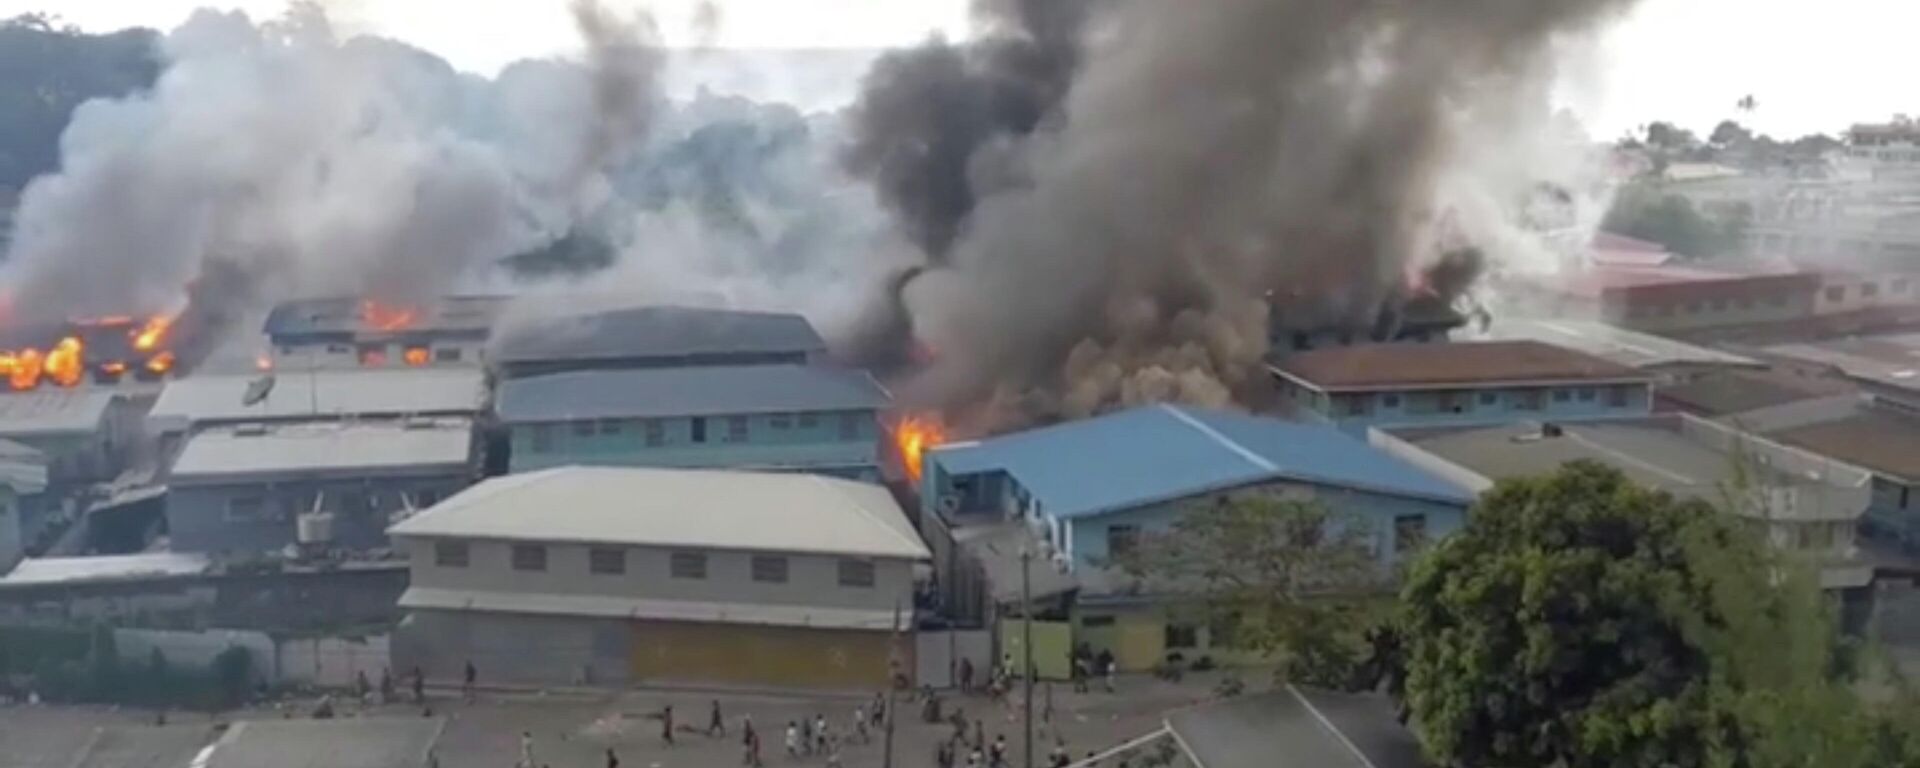 Smoke rises from burning buildings in Chinatown of Solomon Islands' capital Honiara, Solomon Islands, November 25, 2021 in this picture obtained from a social media video. @Zfm Radio My Favourite Music Station via REUTERS   - Sputnik International, 1920, 27.11.2021